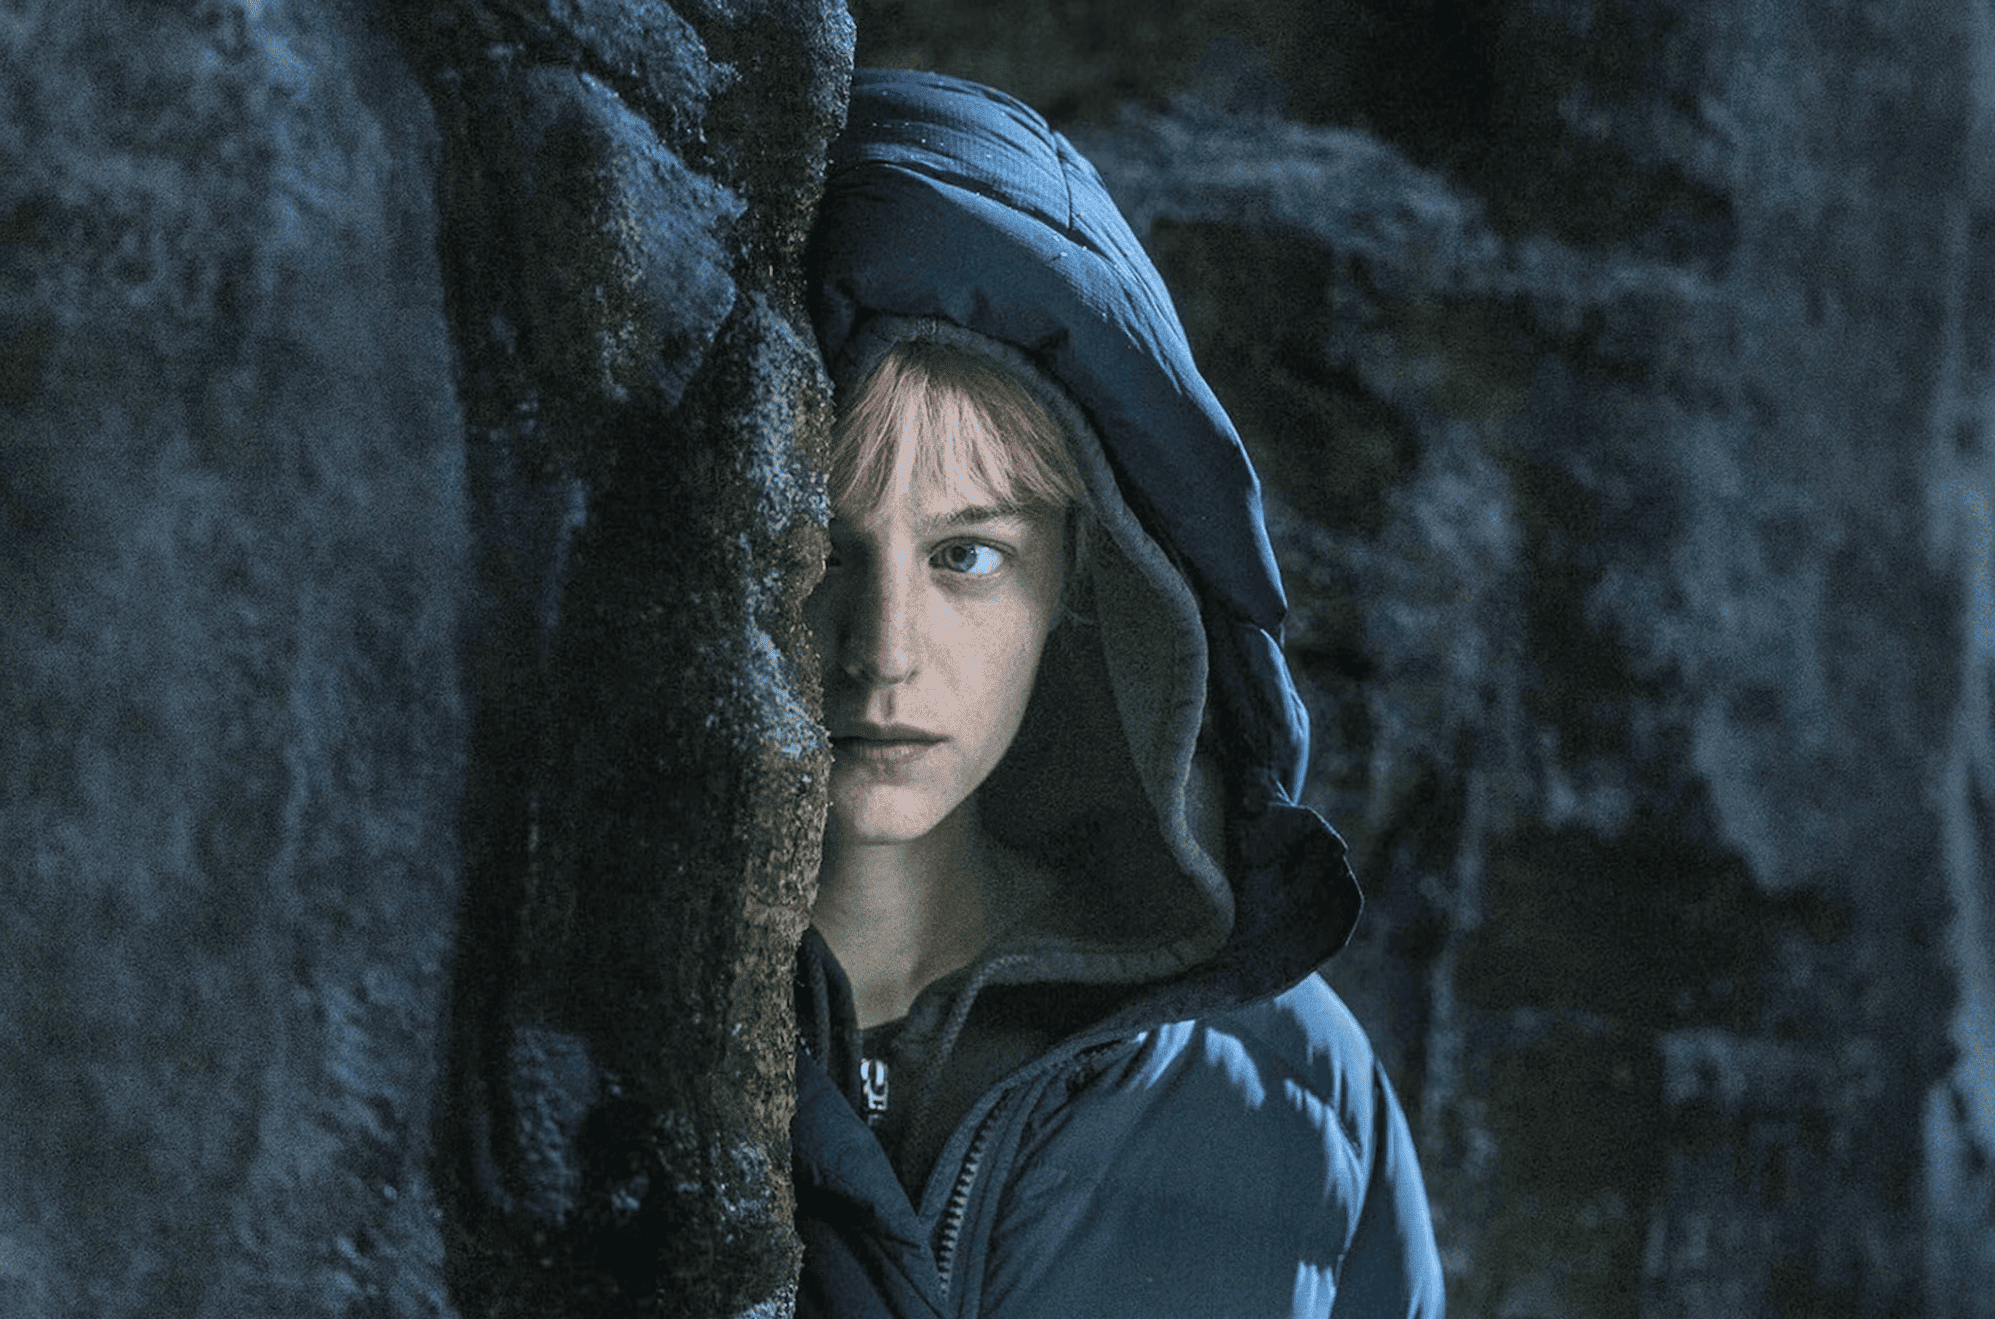 A woman wearing a coat peers from behind a rocky cliff in this image from Mysterium Valley.